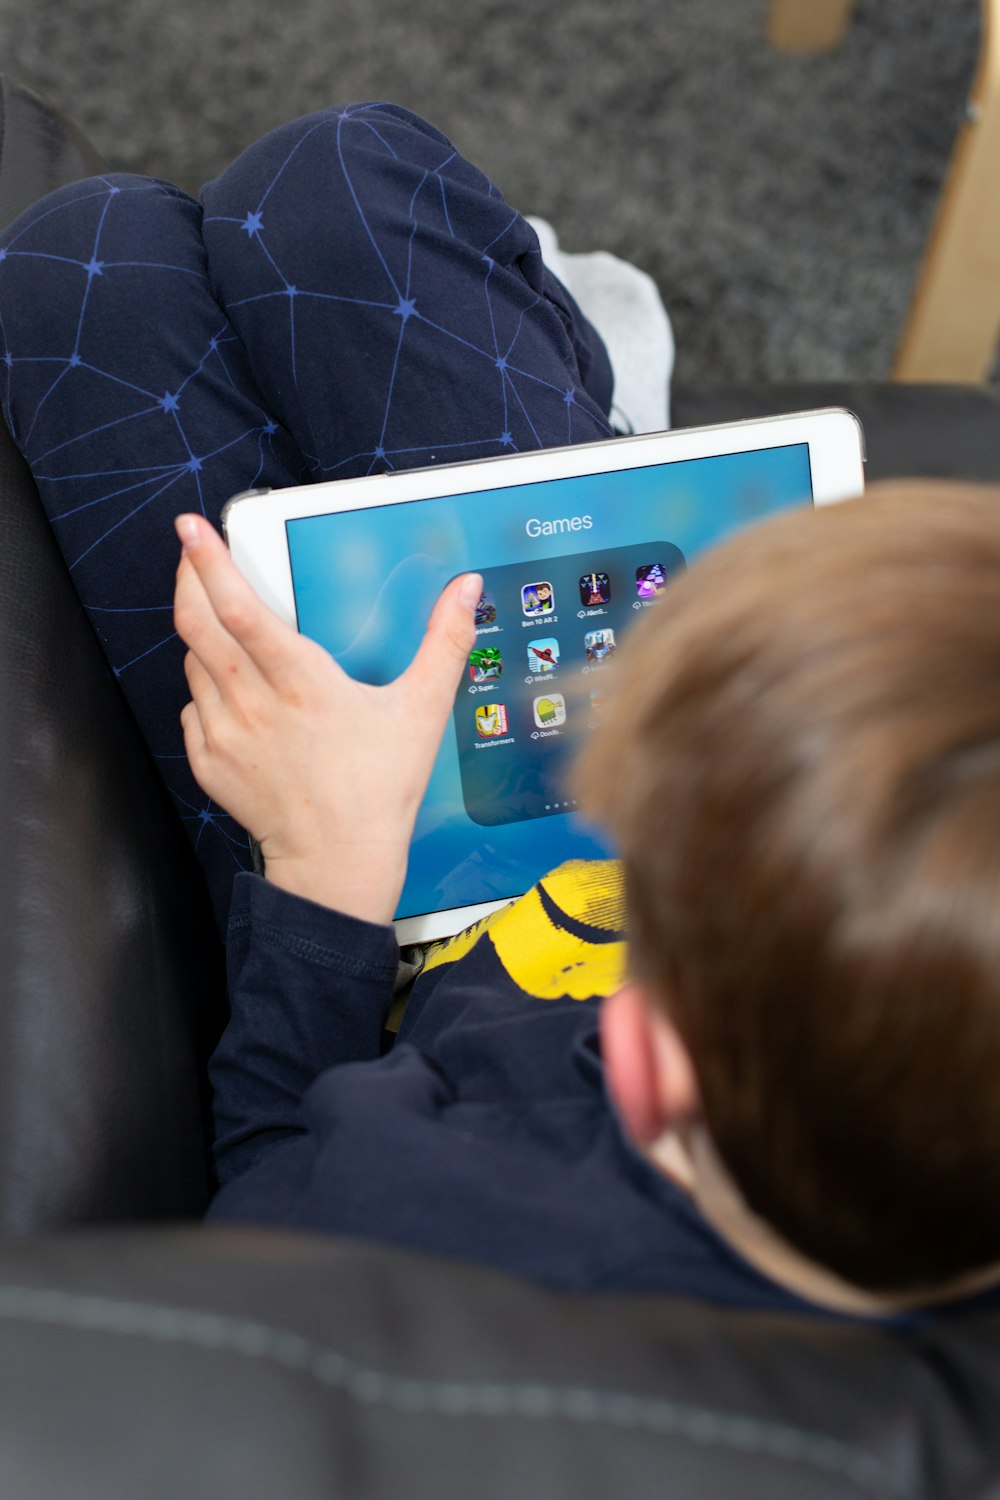 a young boy sitting on a couch holding a tablet